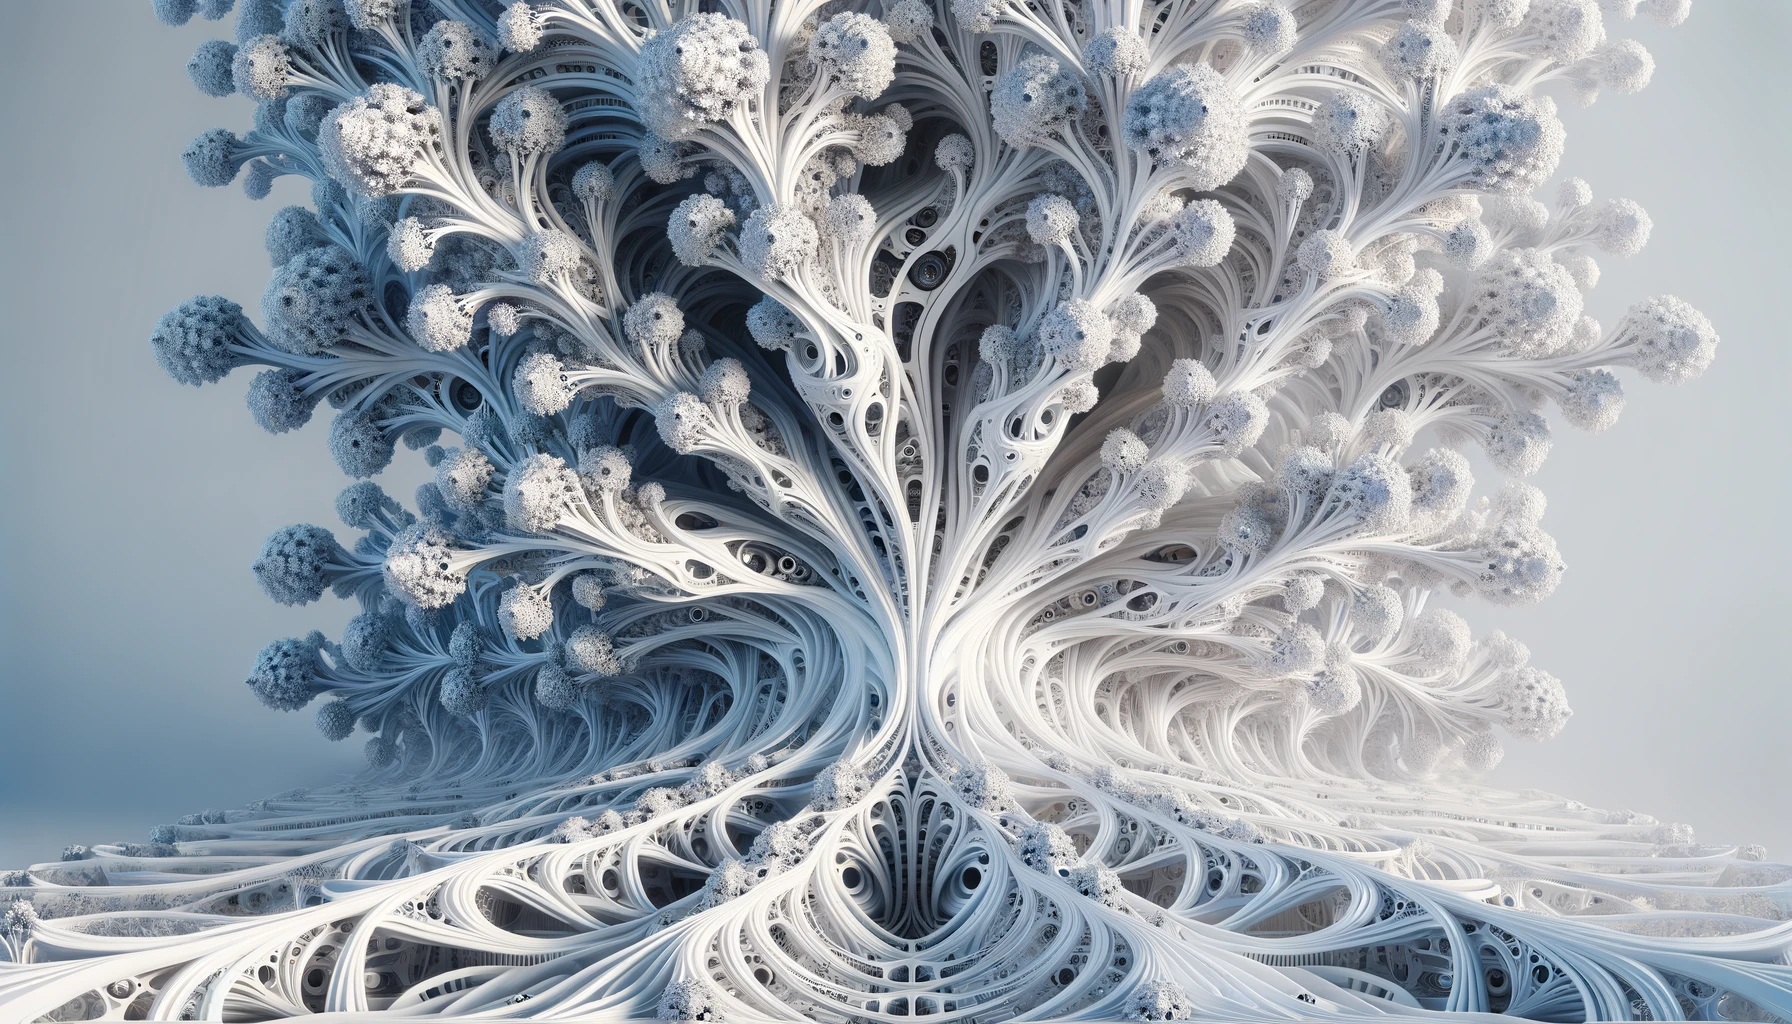 DALL·E 2023-11-30 13.19.09 - An intricate and detailed image of fractal, white branched robotic root structures. These roots are designed to appear both organic and mechanical, sh.png